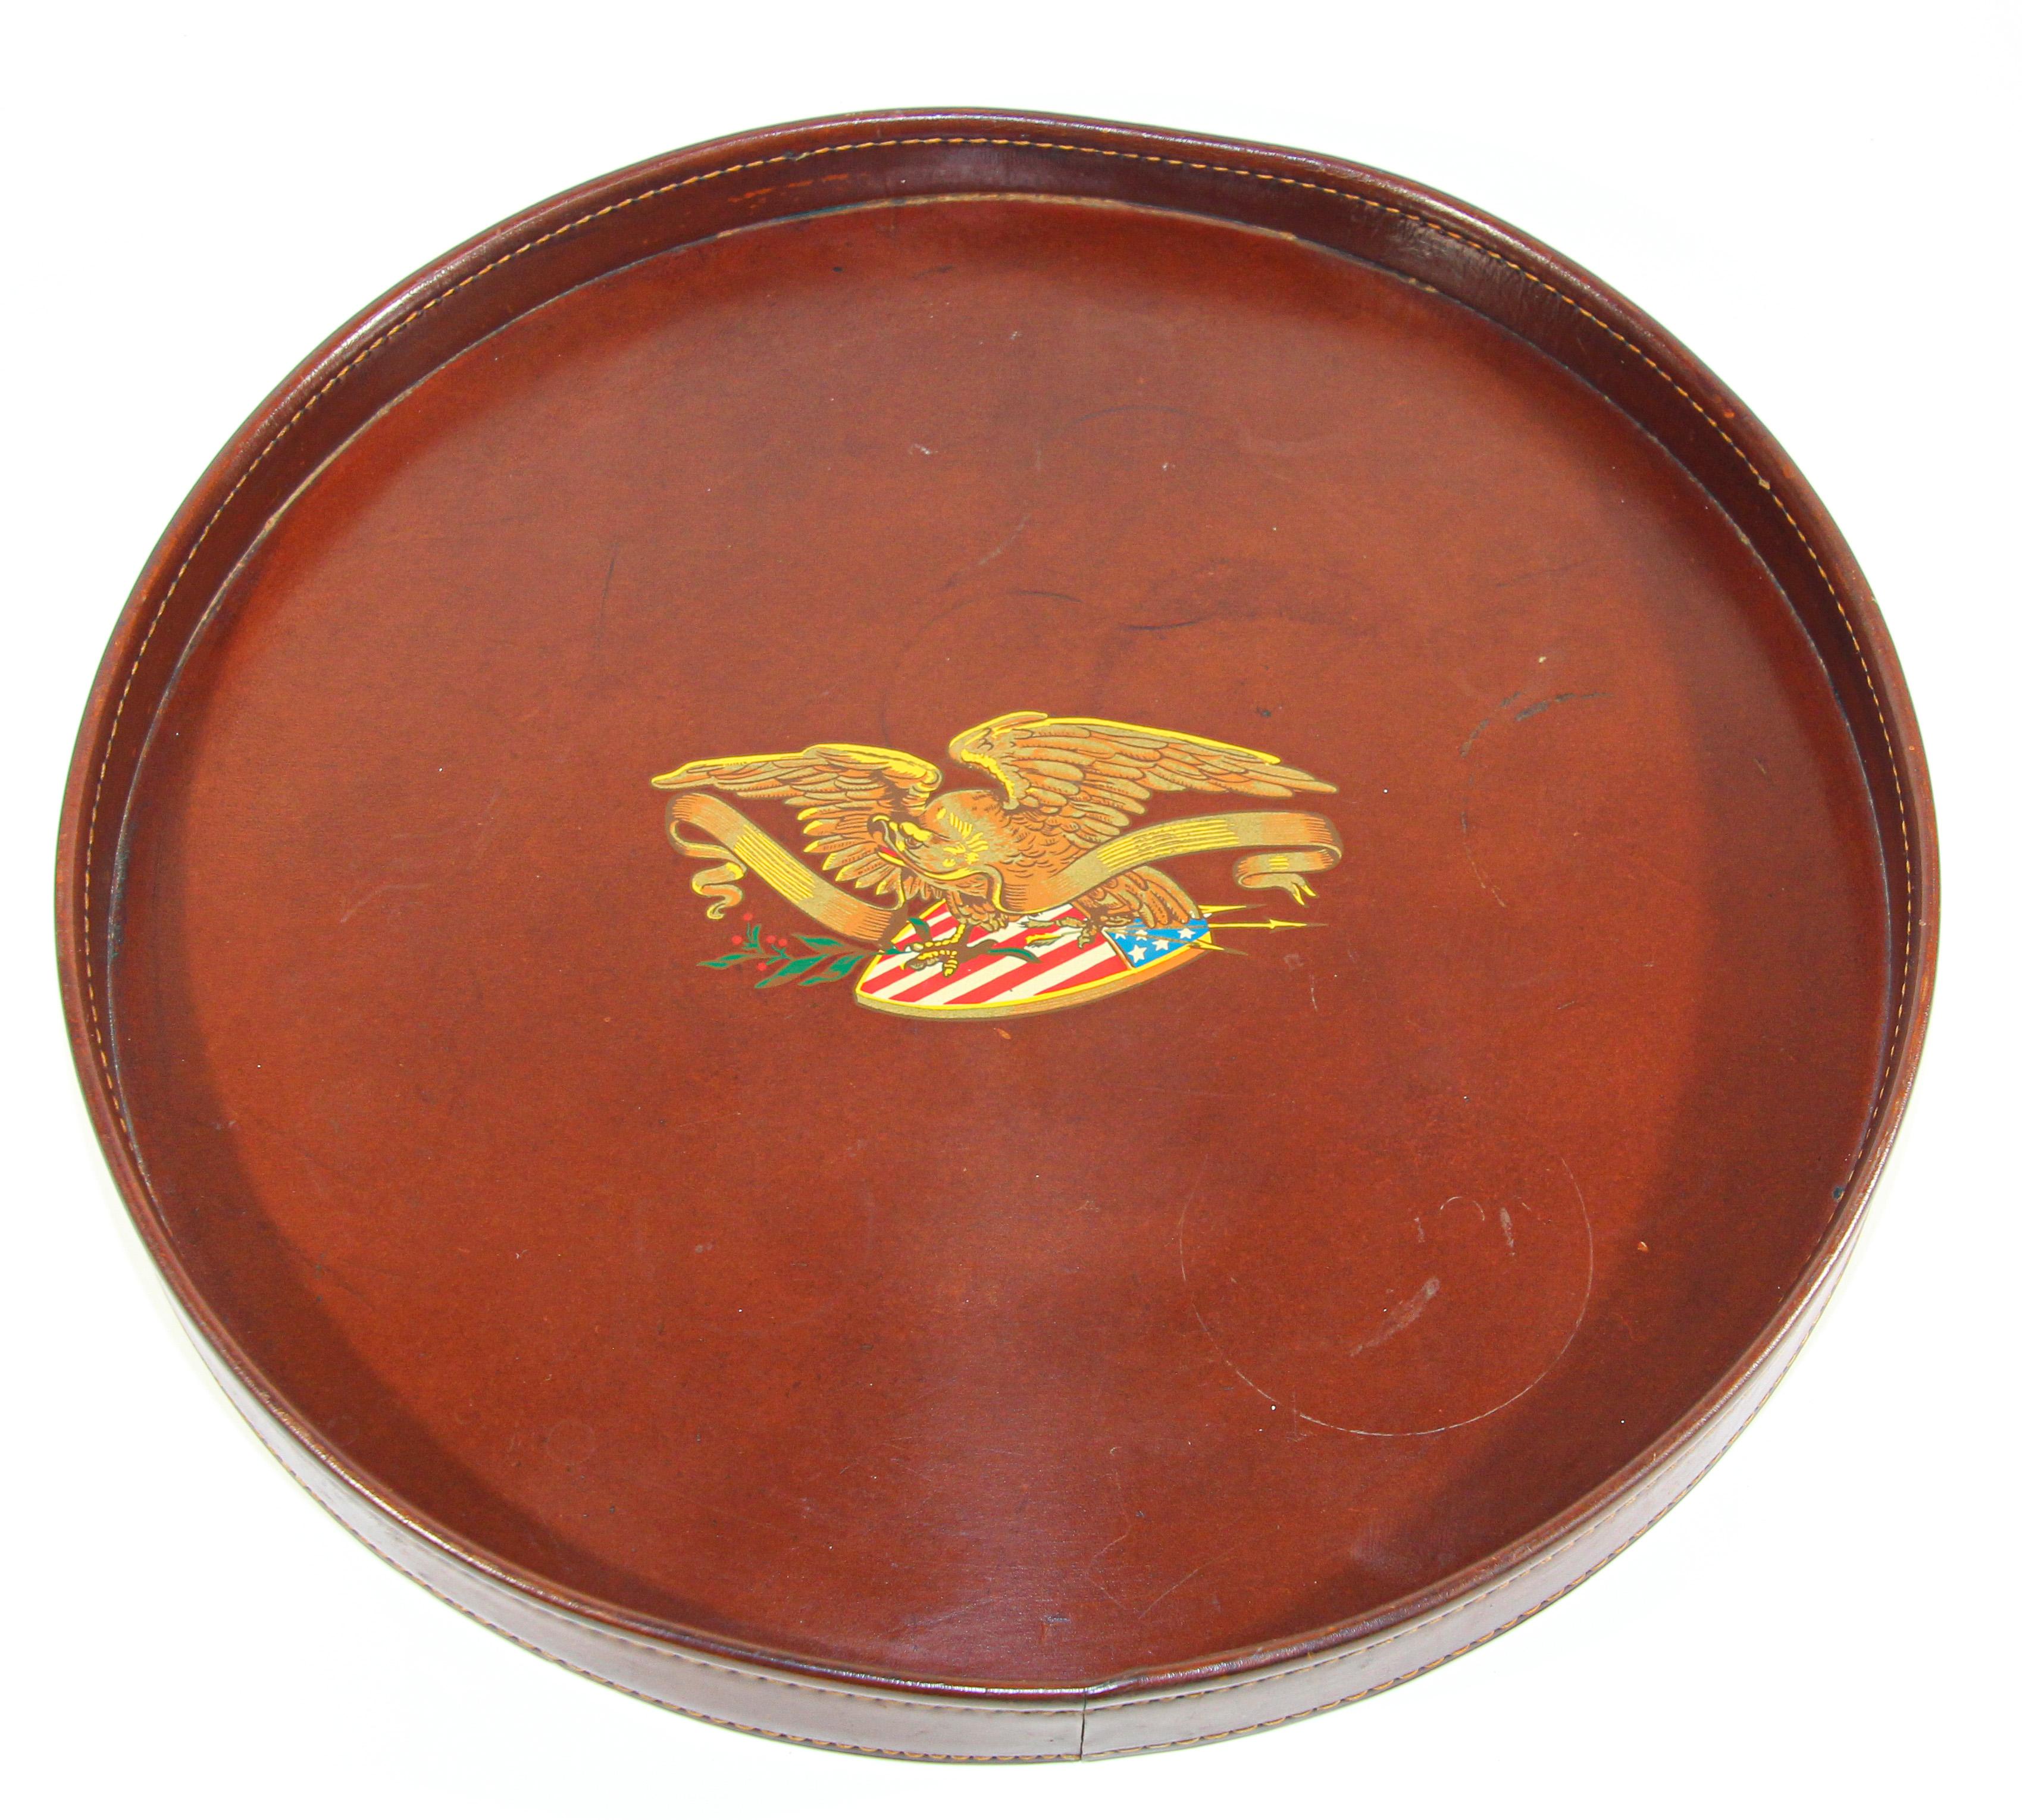 Small vintage round brown leather tray hand painted in the middle with the Bald Eagle carrying the American Flag.
Vintage handcrafted leather tray with the patriotic American motif with hand-stitched along the sides of the tray.
A timeless design